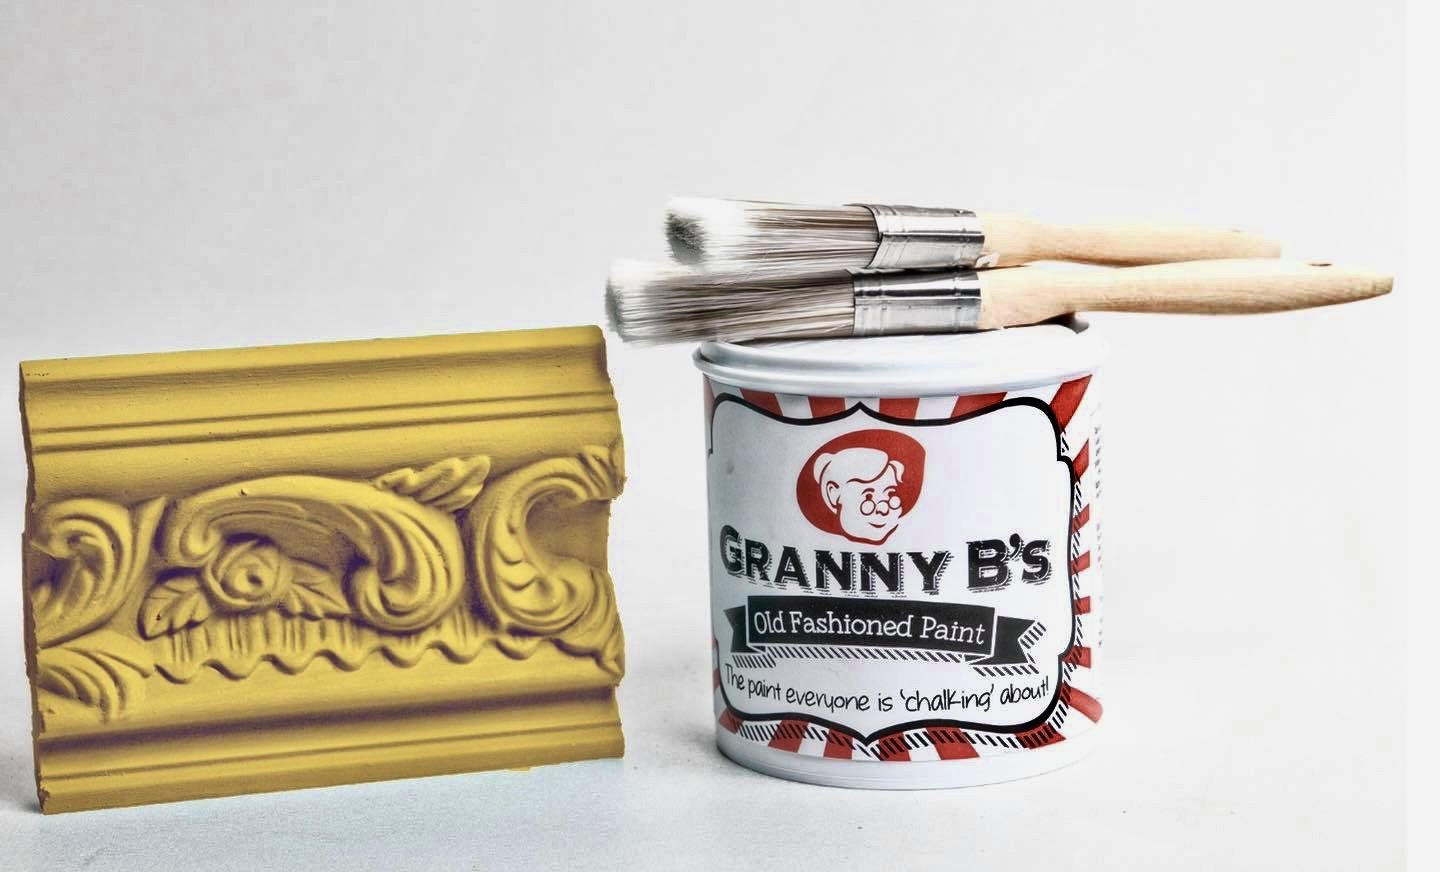 Old Fashioned Paint - Dijon  (Mustard Yellow) - Granny B's Old Fashioned Paint